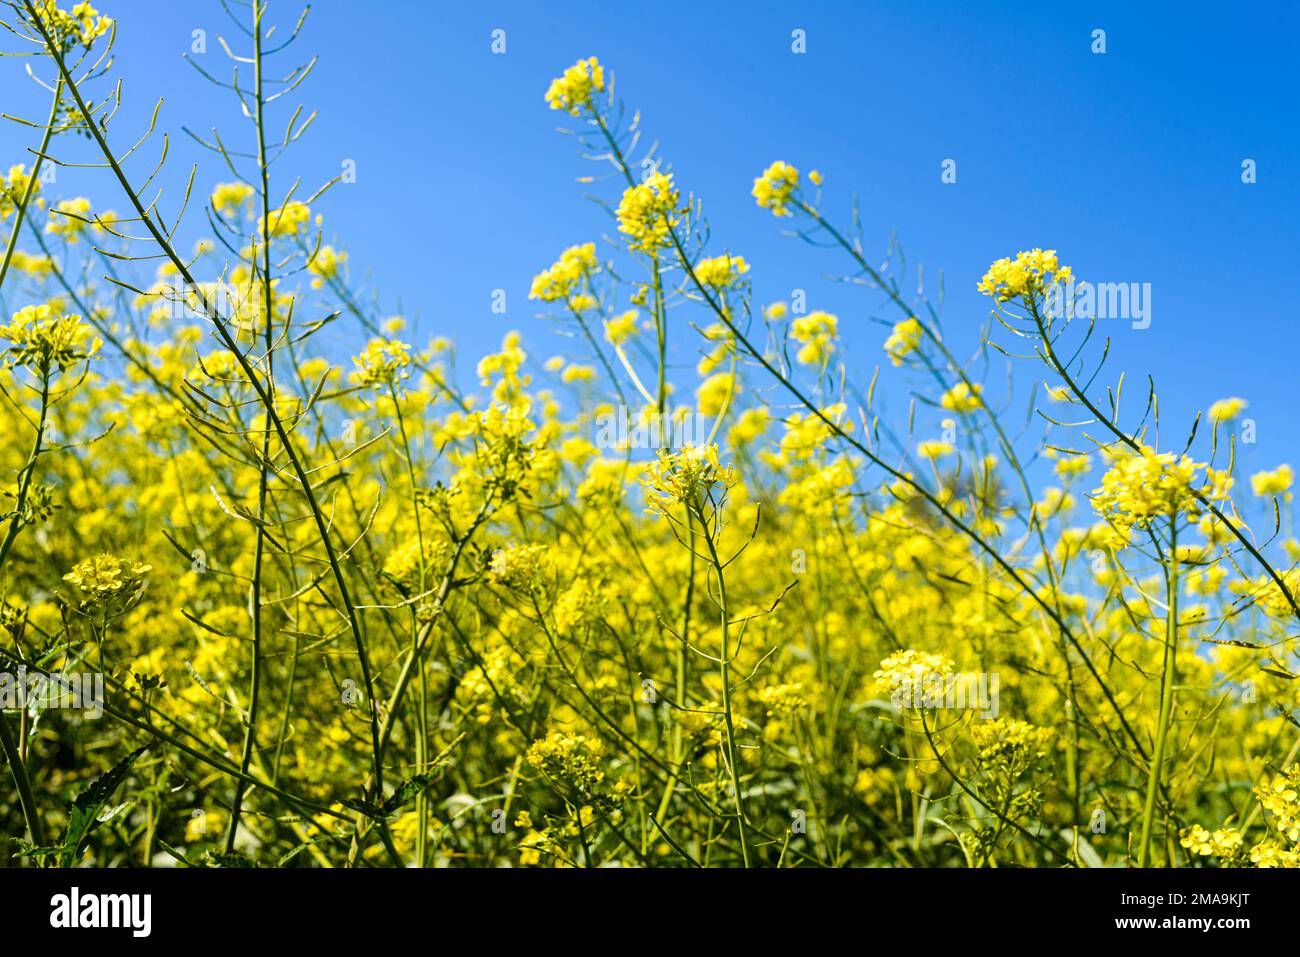 Yellow flowers with a blue sky in the background. Conceptual image with a landscape in the colors of the Ukrainian flag, symbolizing the end of the wa Stock Photo